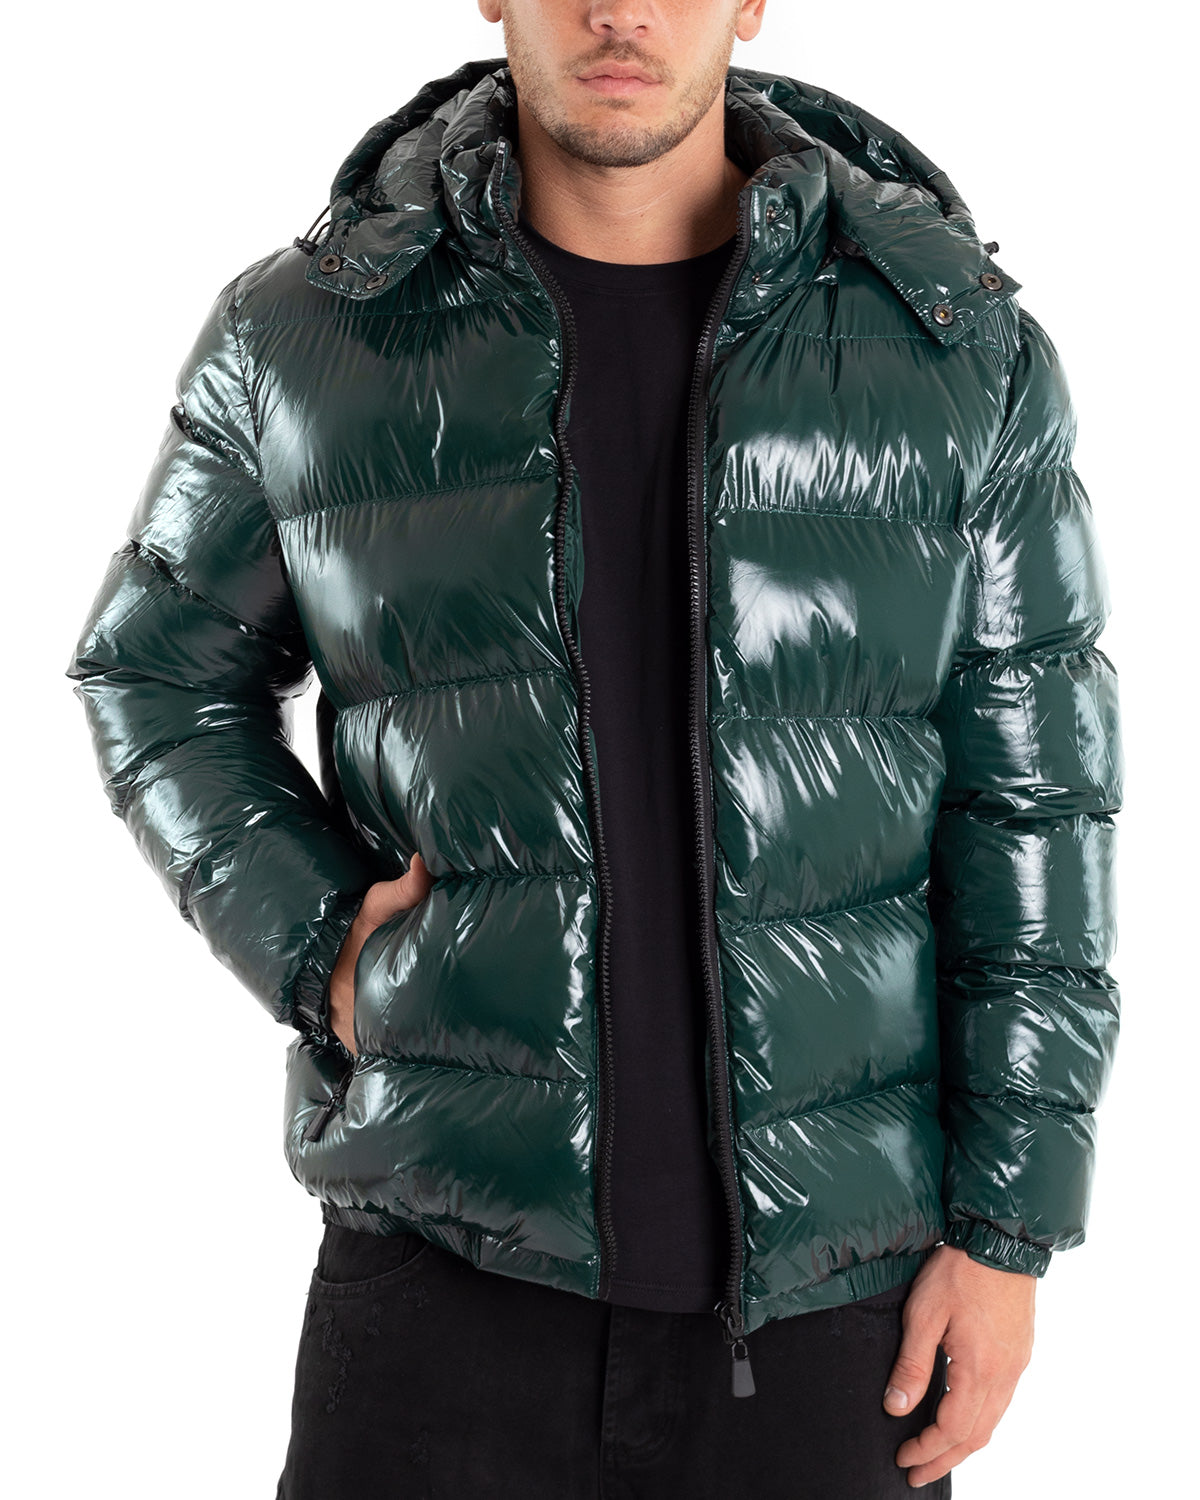 Men's Oversized Patent Leather Jacket Solid Color Shiny Green Casual GIOSAL-G2894A